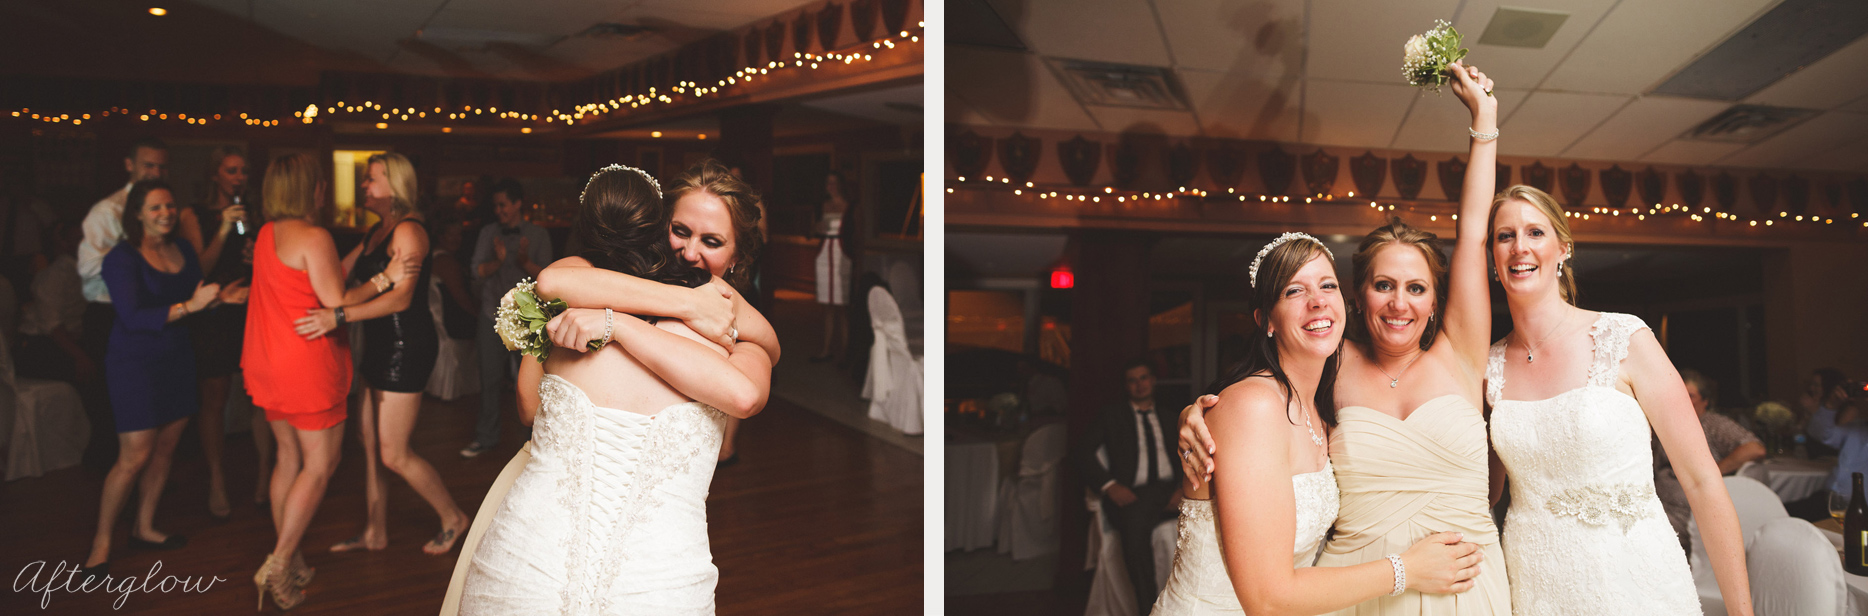 dancing the night away at henley wedding reception